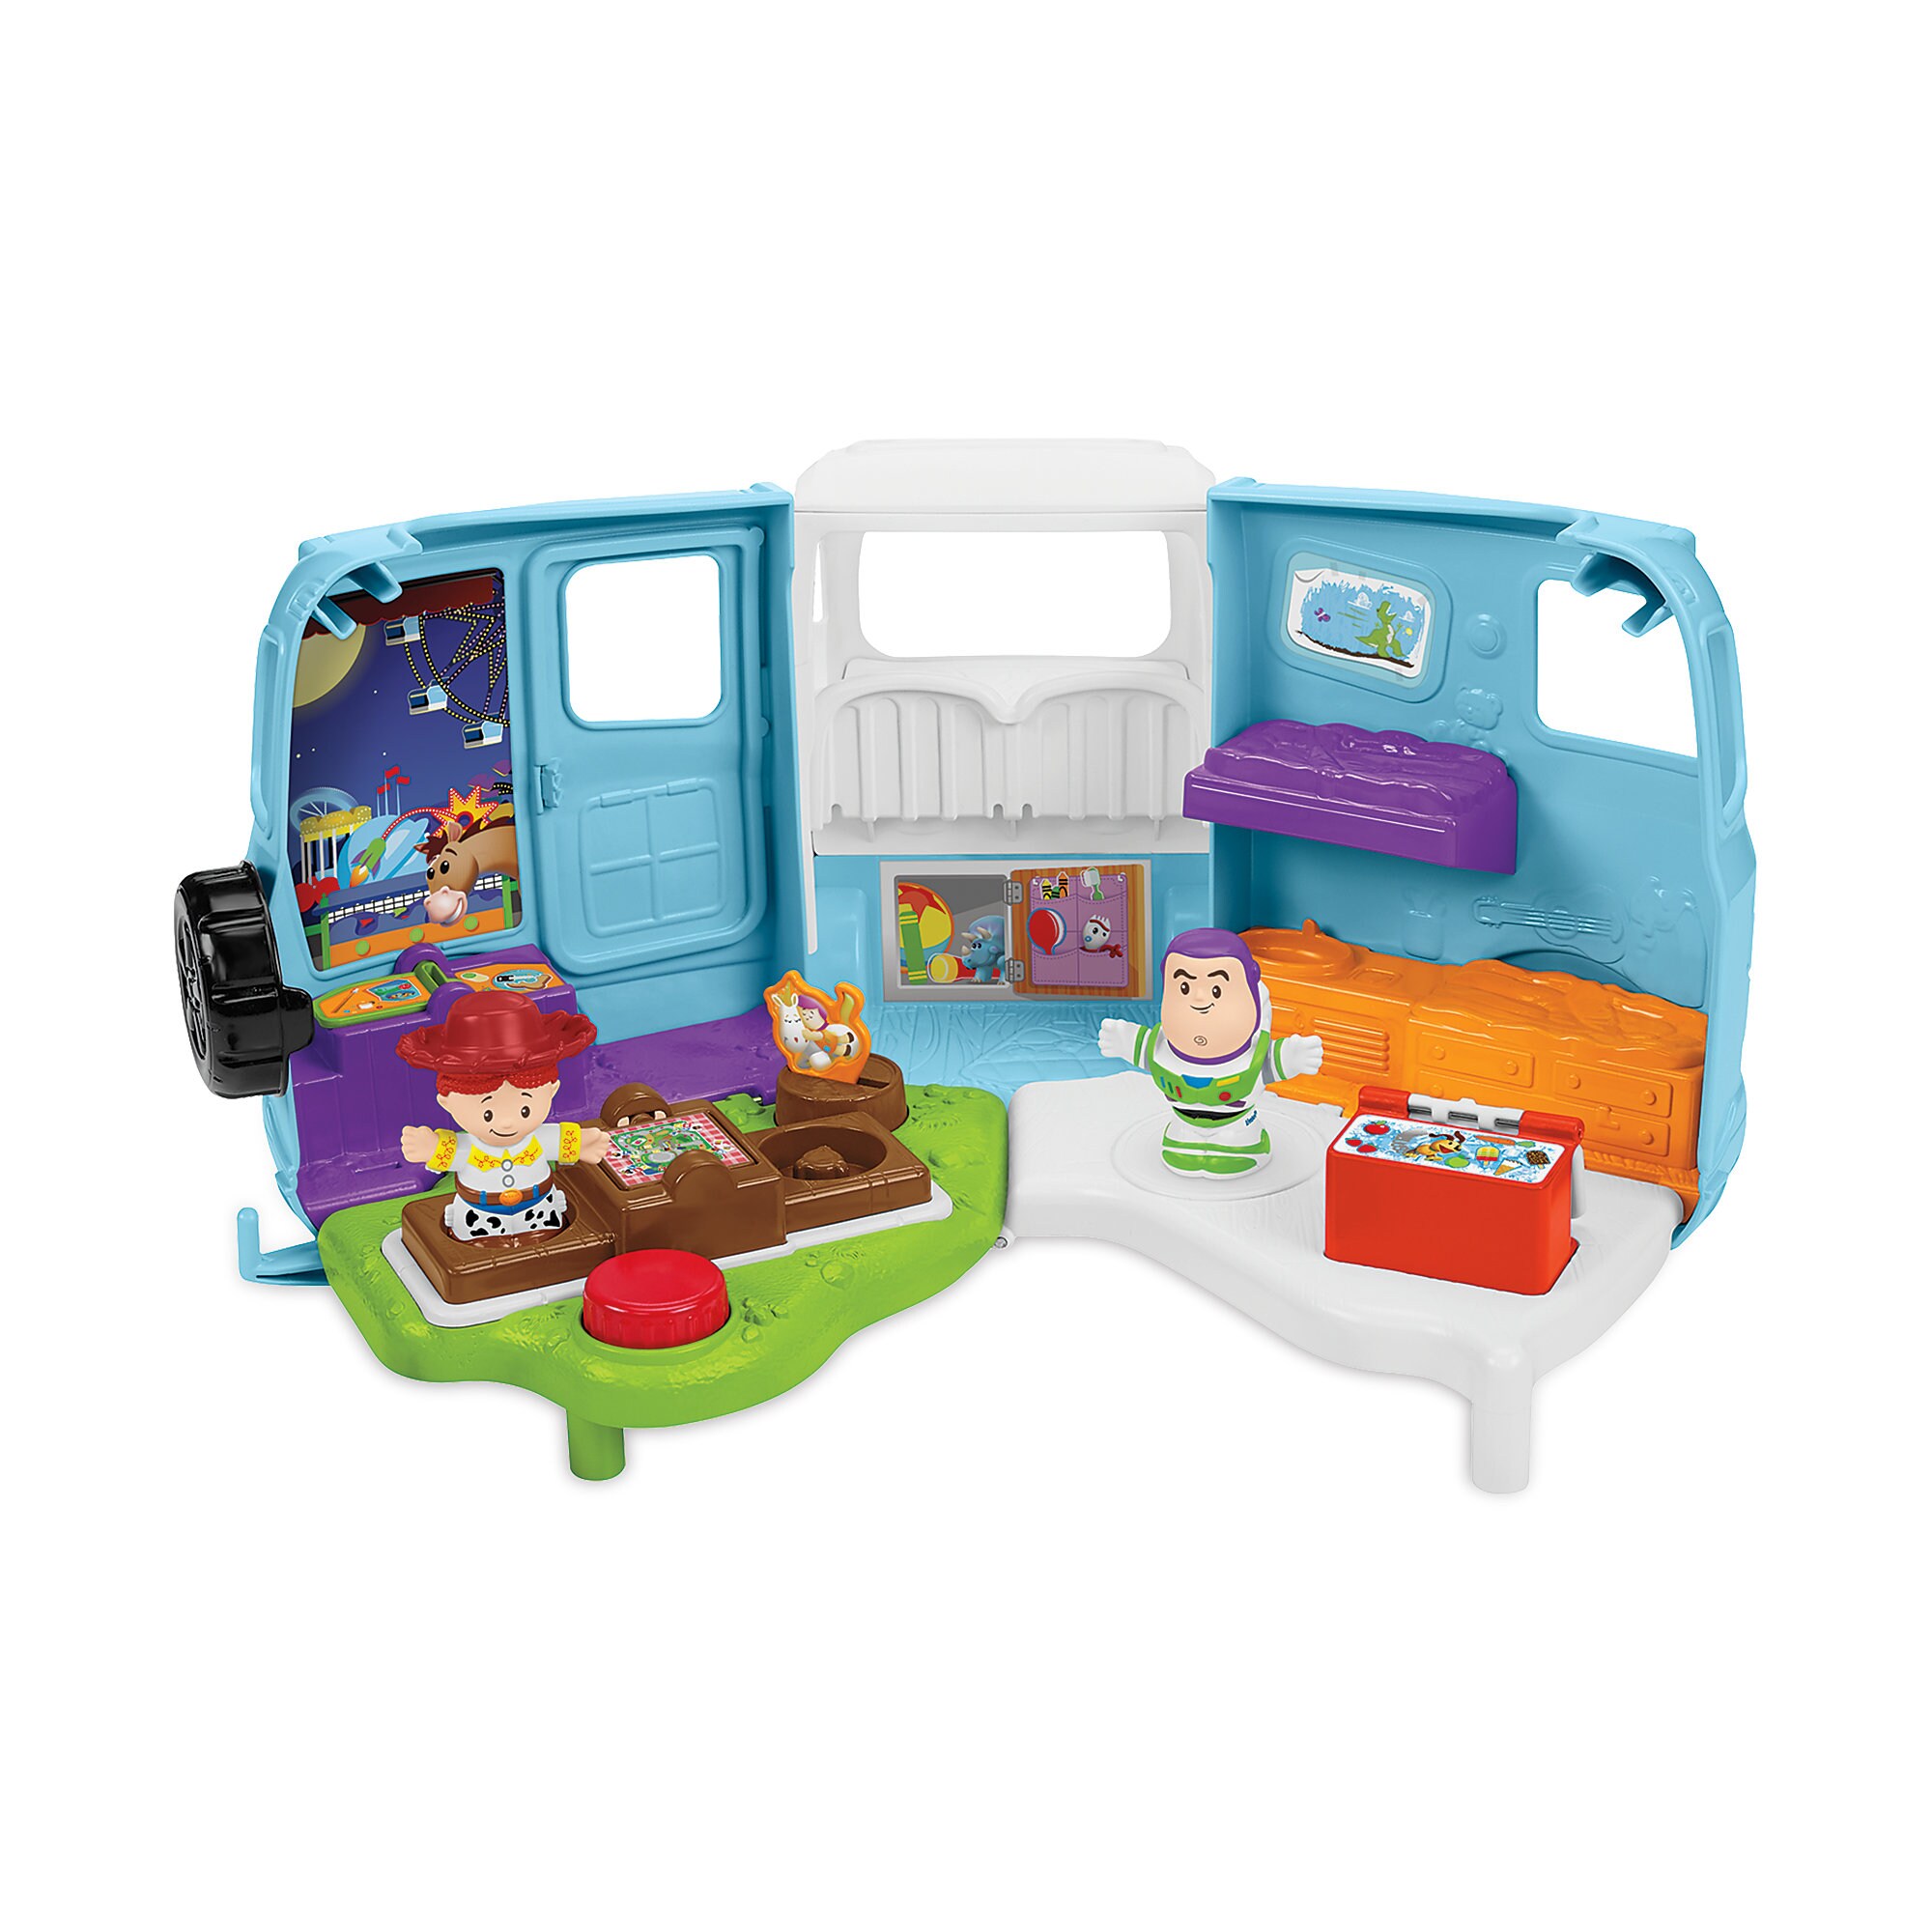 Jessie's Campground Adventure Play Set by Little People - Toy Story 4